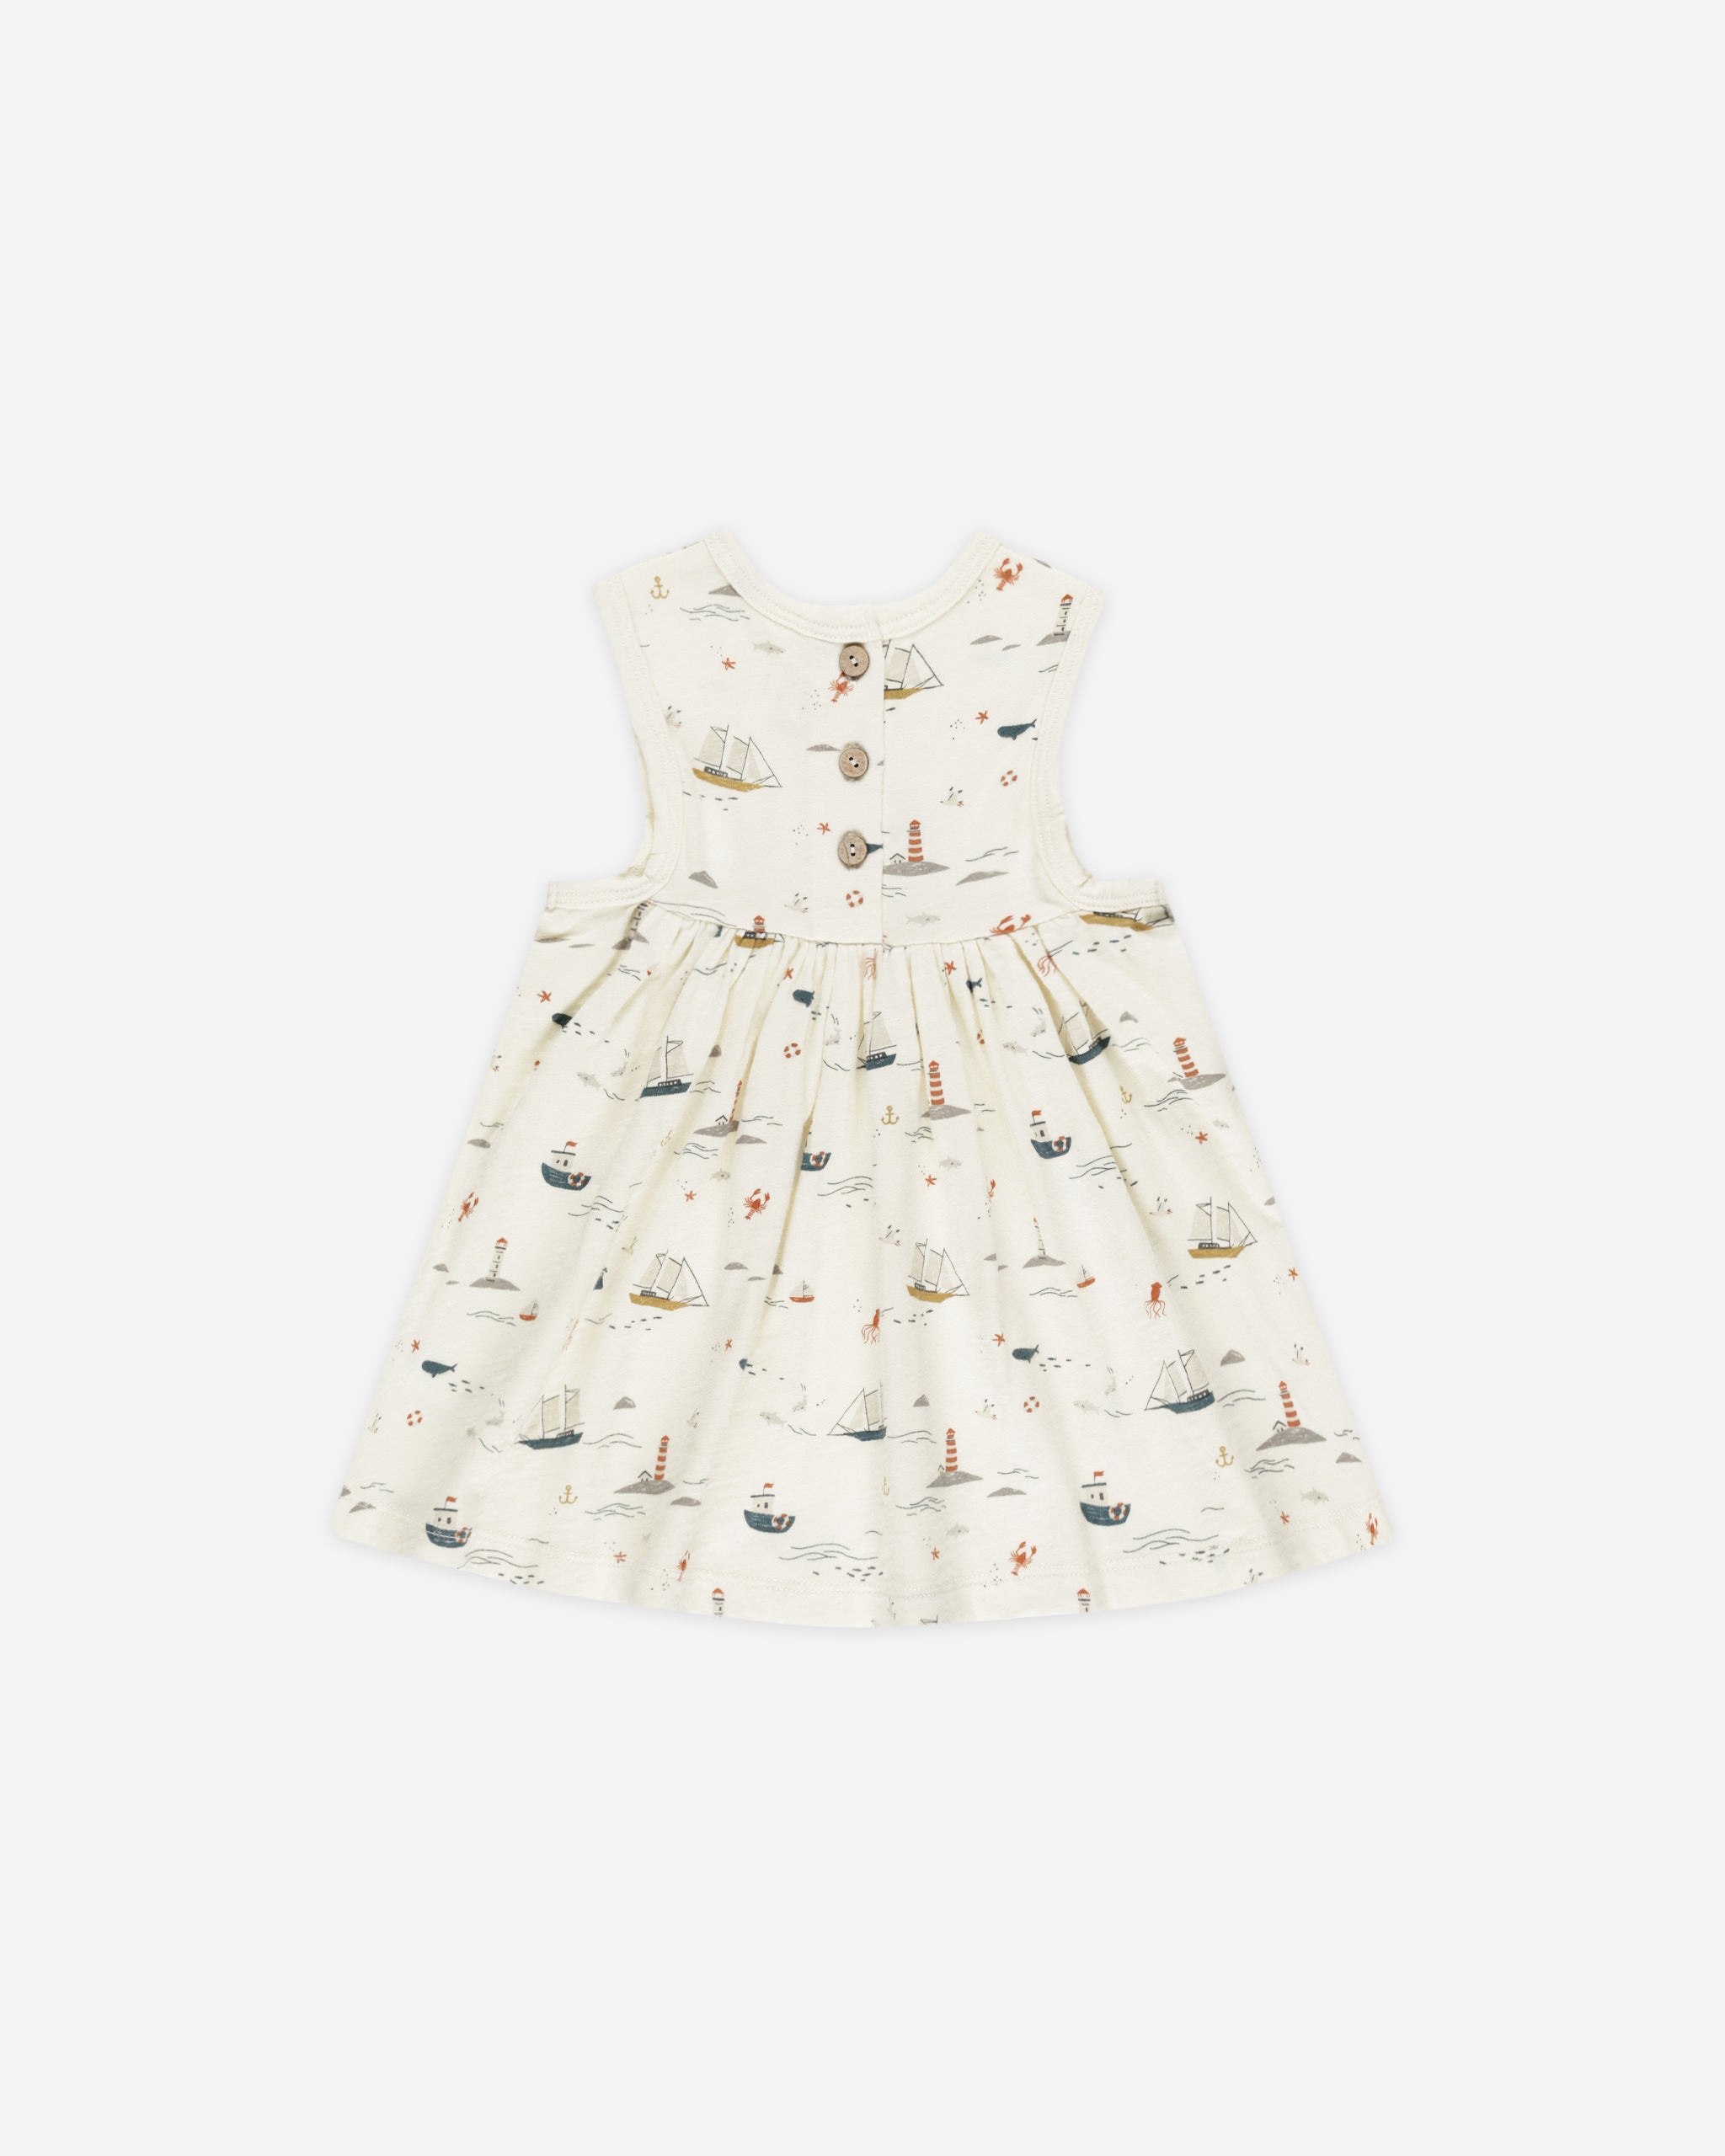 Layla Dress || Nautical - Rylee + Cru | Kids Clothes | Trendy Baby Clothes | Modern Infant Outfits |